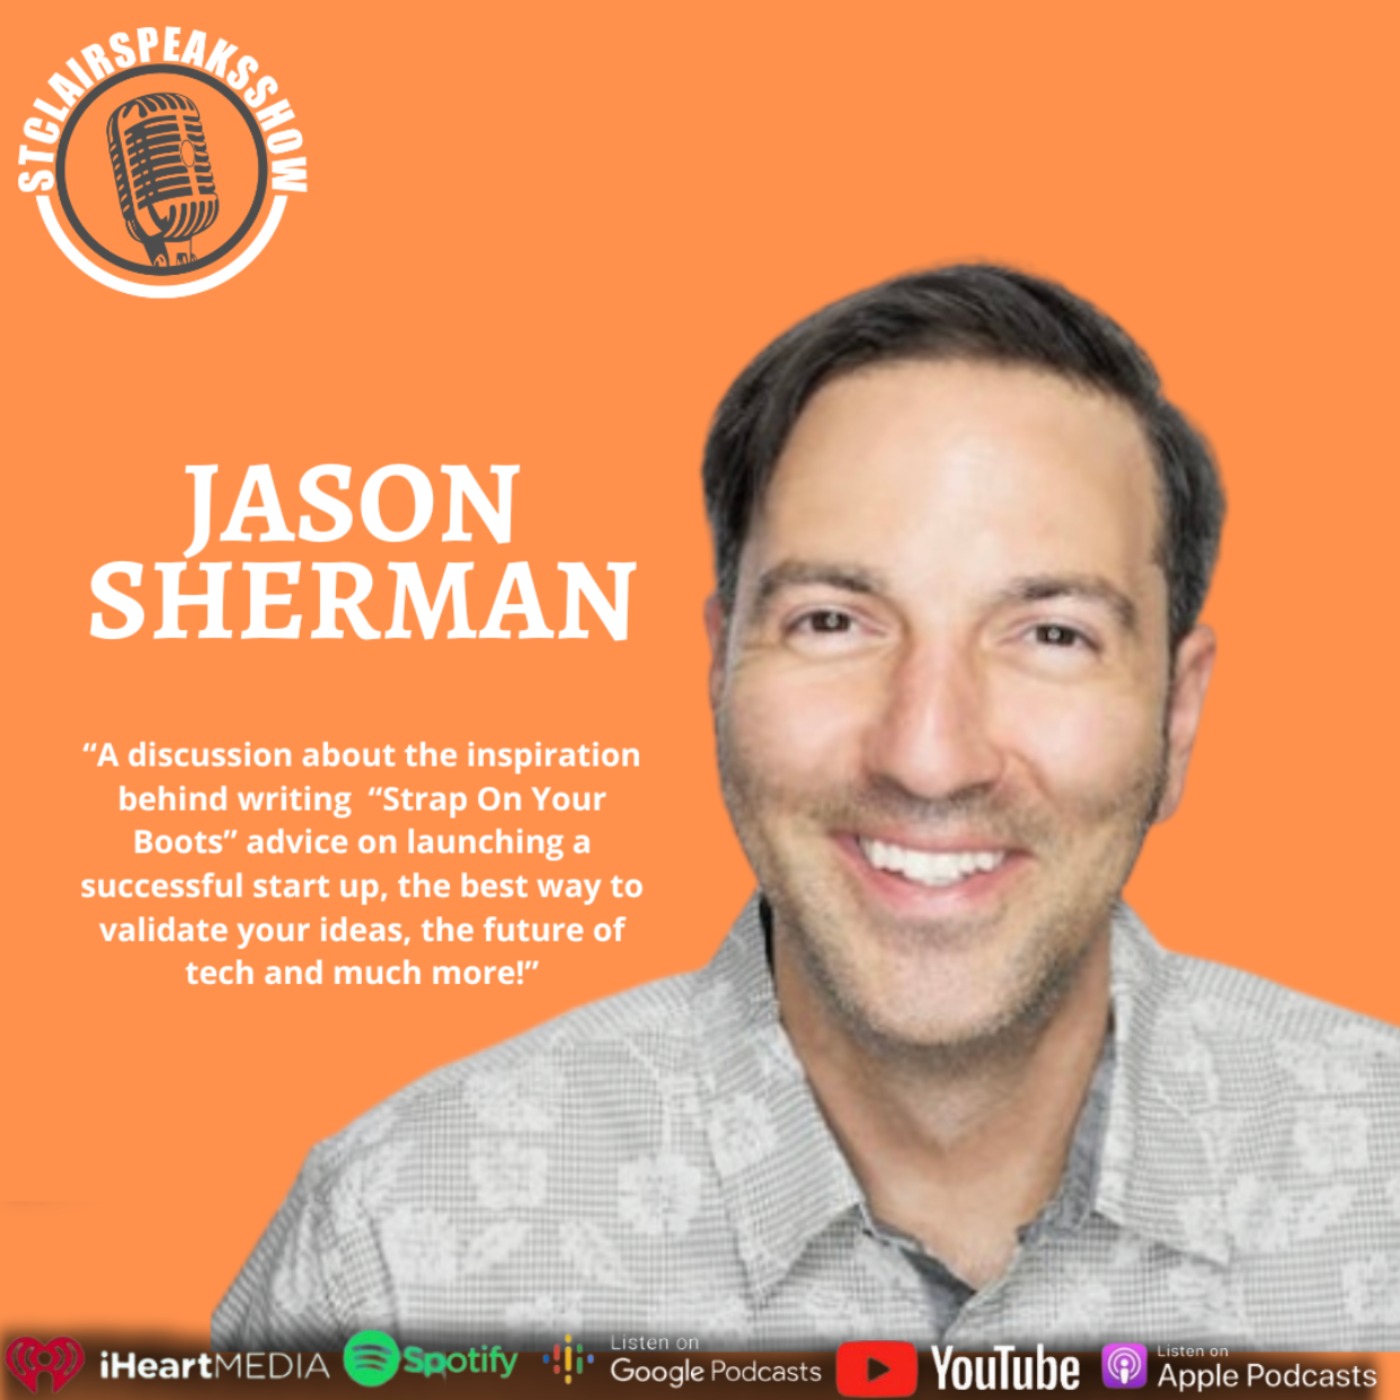 The StclairclairSpeaksShow featuring Jason Sherman How to properly build a minimum viable product and have a beta launch?